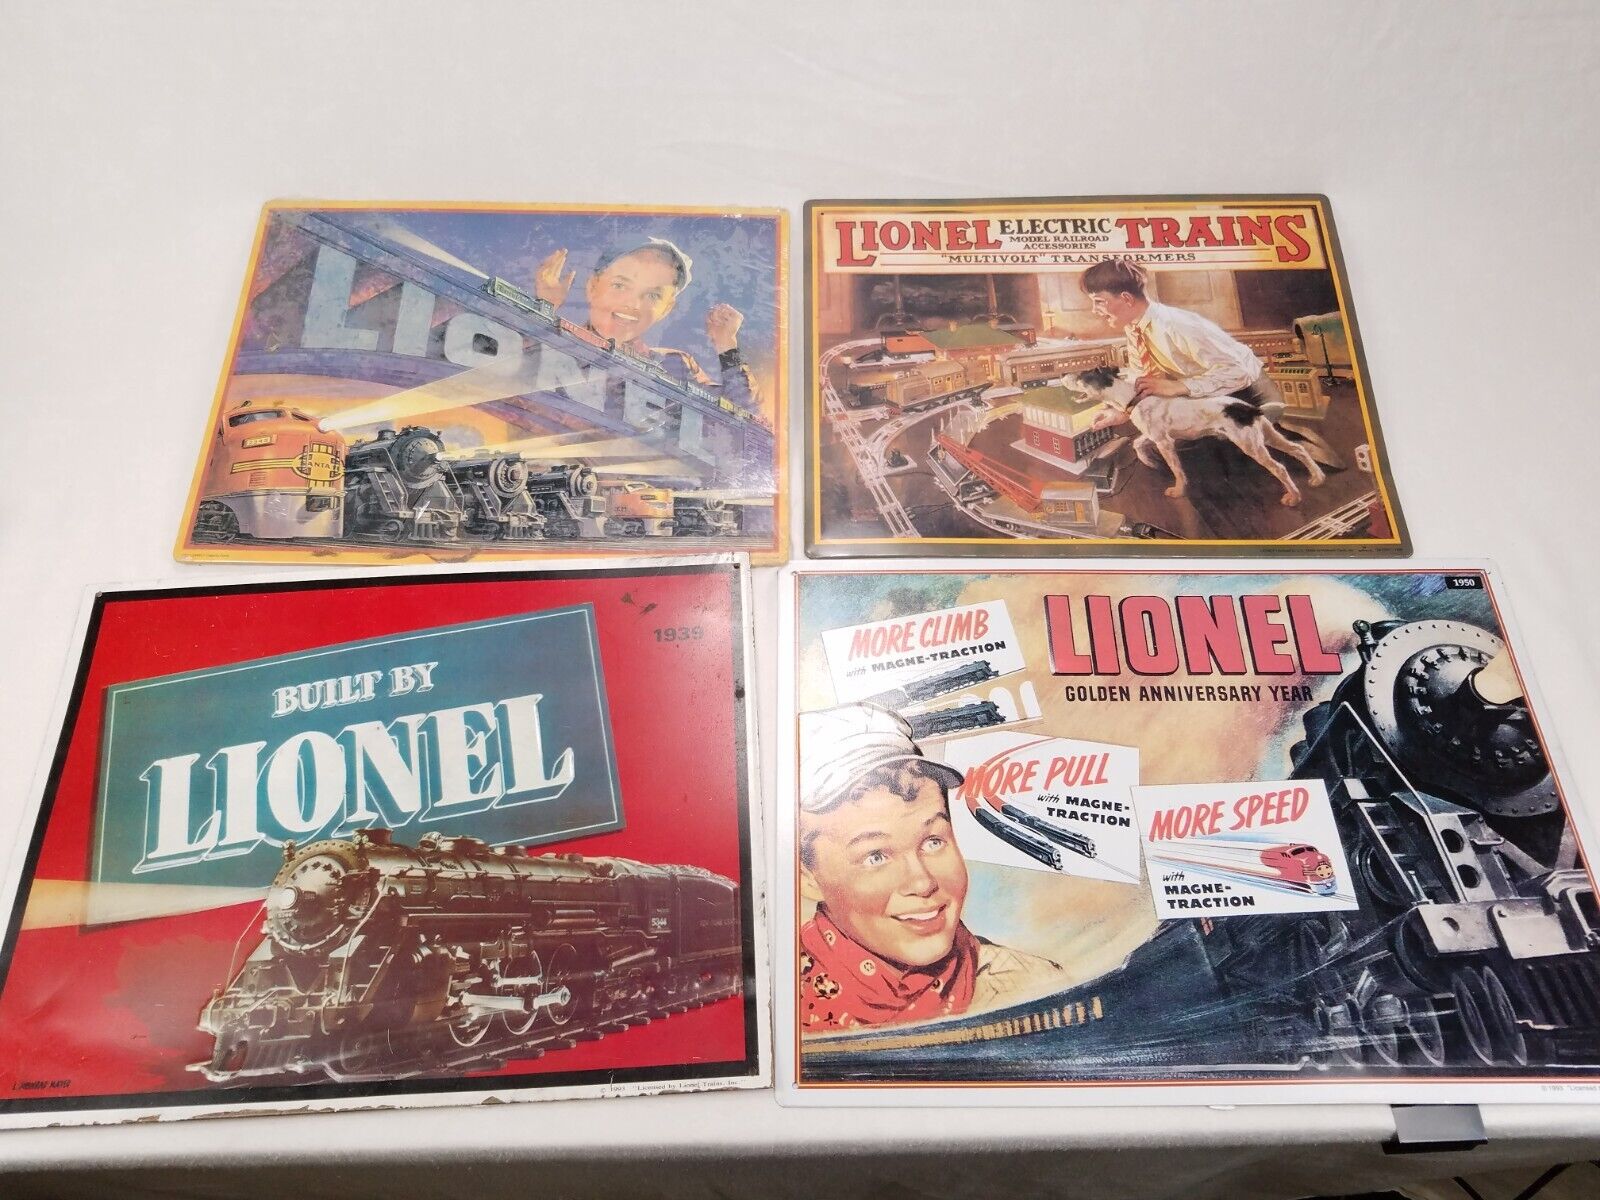 x4 Lot of Lionel Tin Signs, Built by Lionel, Golden Anniversary, 1930-1950s